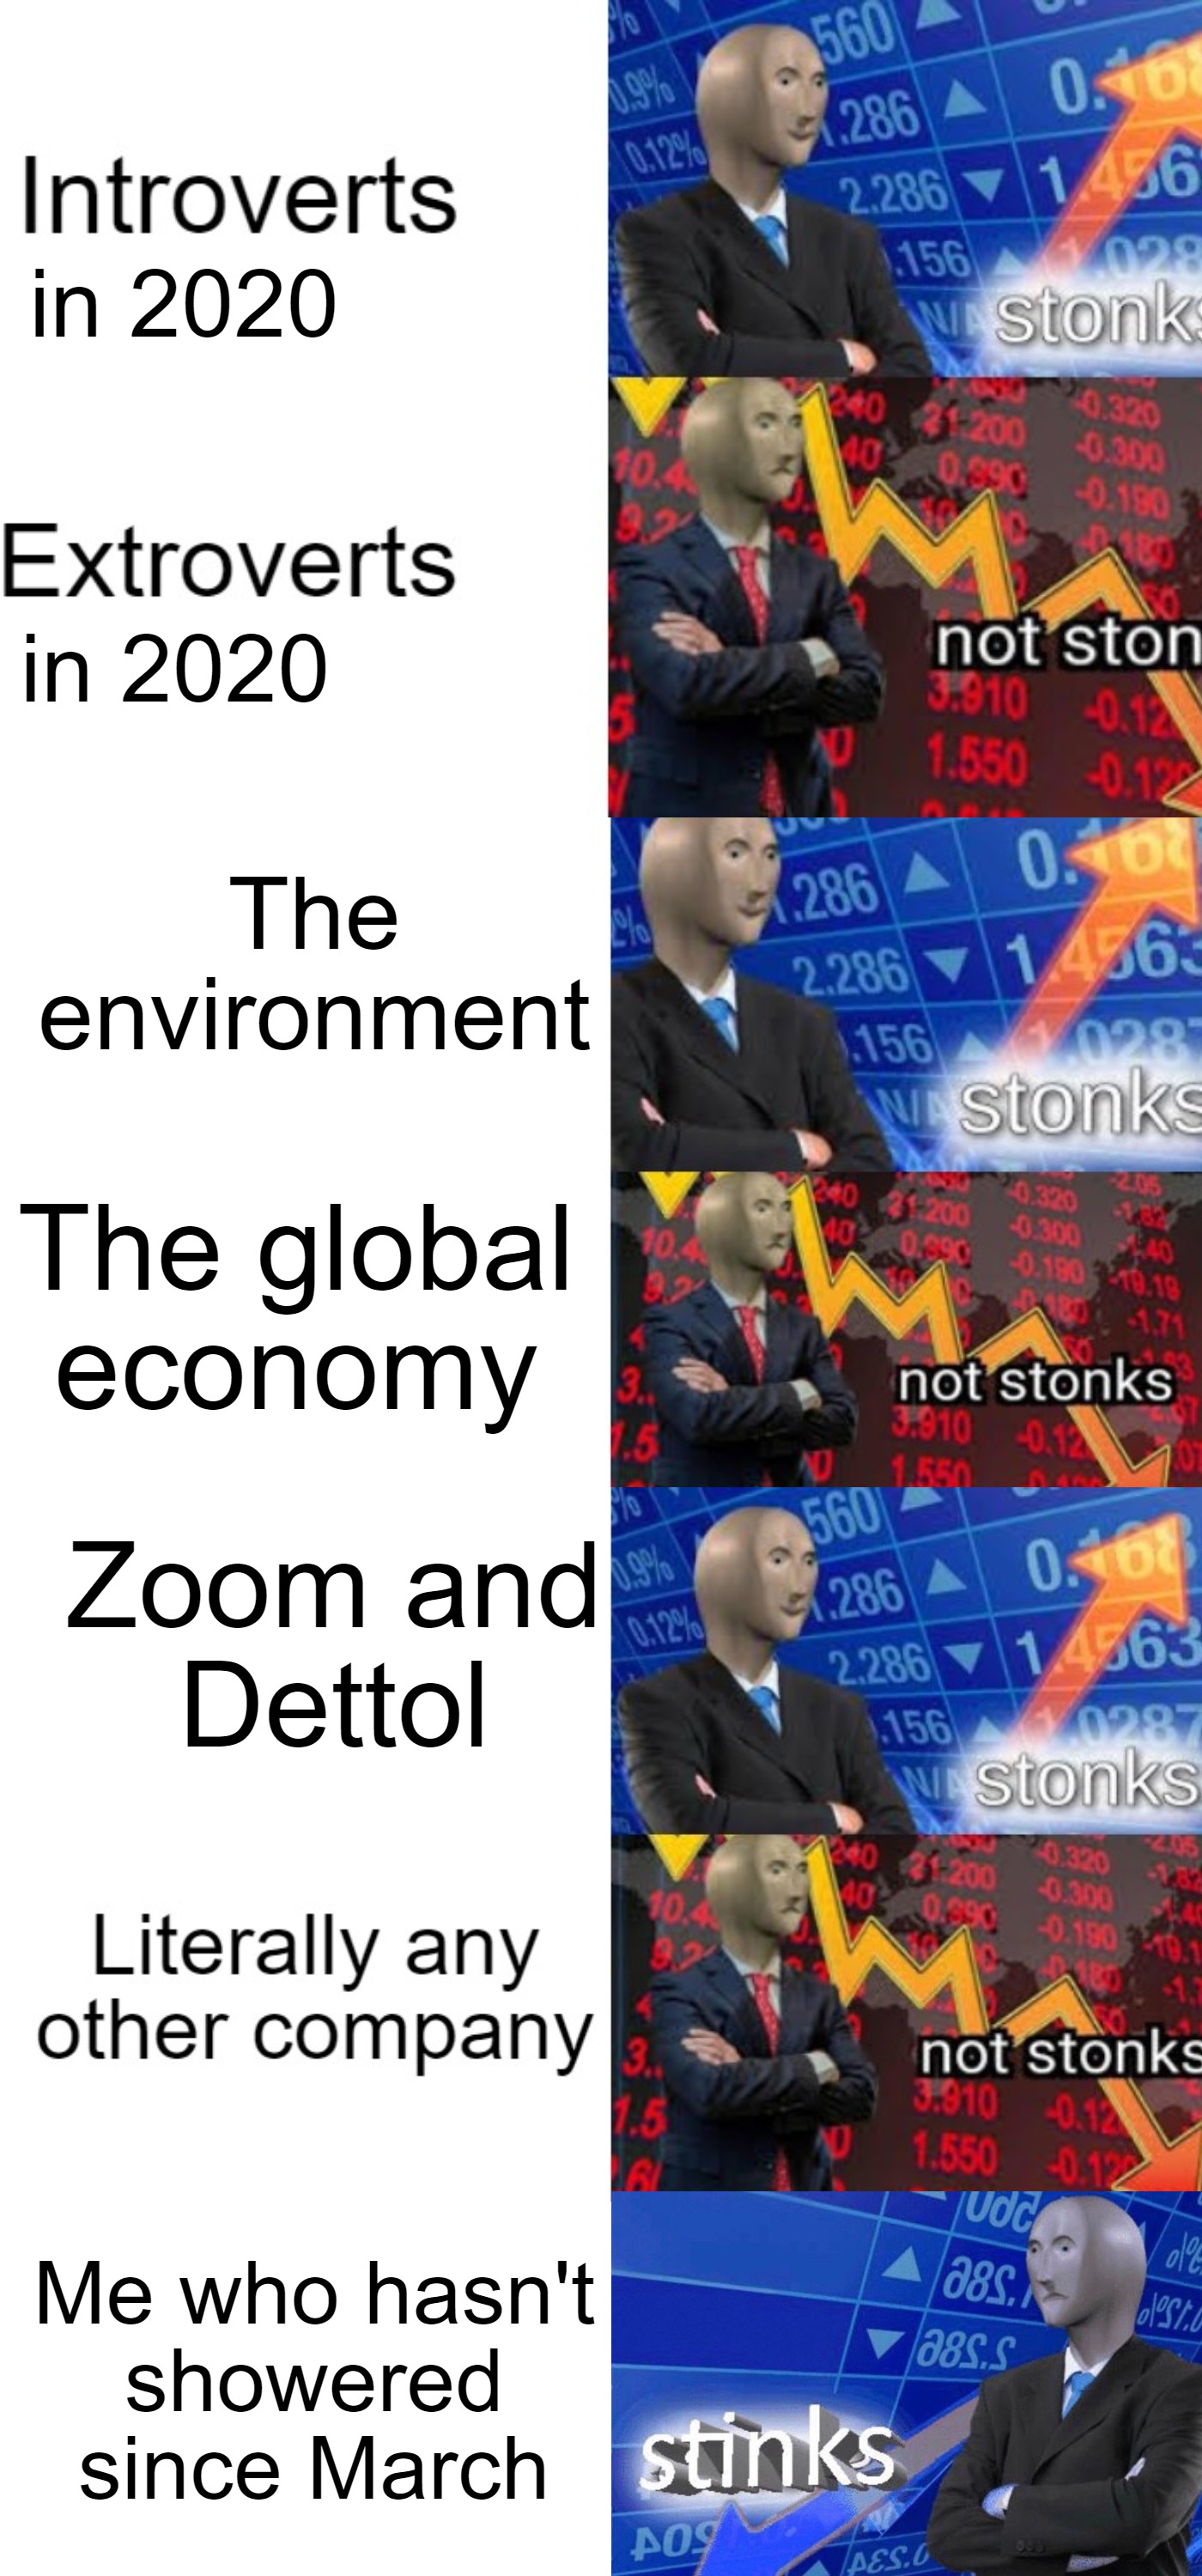 poster - 560 0.40 2016 2266 1436 Introverts in 2020 Stork Extroverts in 2020 not ston 1910 2286 The environment 0 Or 1486 2206 150 Stonke The global economy not stonks Zoom and Dettol 90 286 2206 0.40 14863 156 Stork Literally any other company not stonks